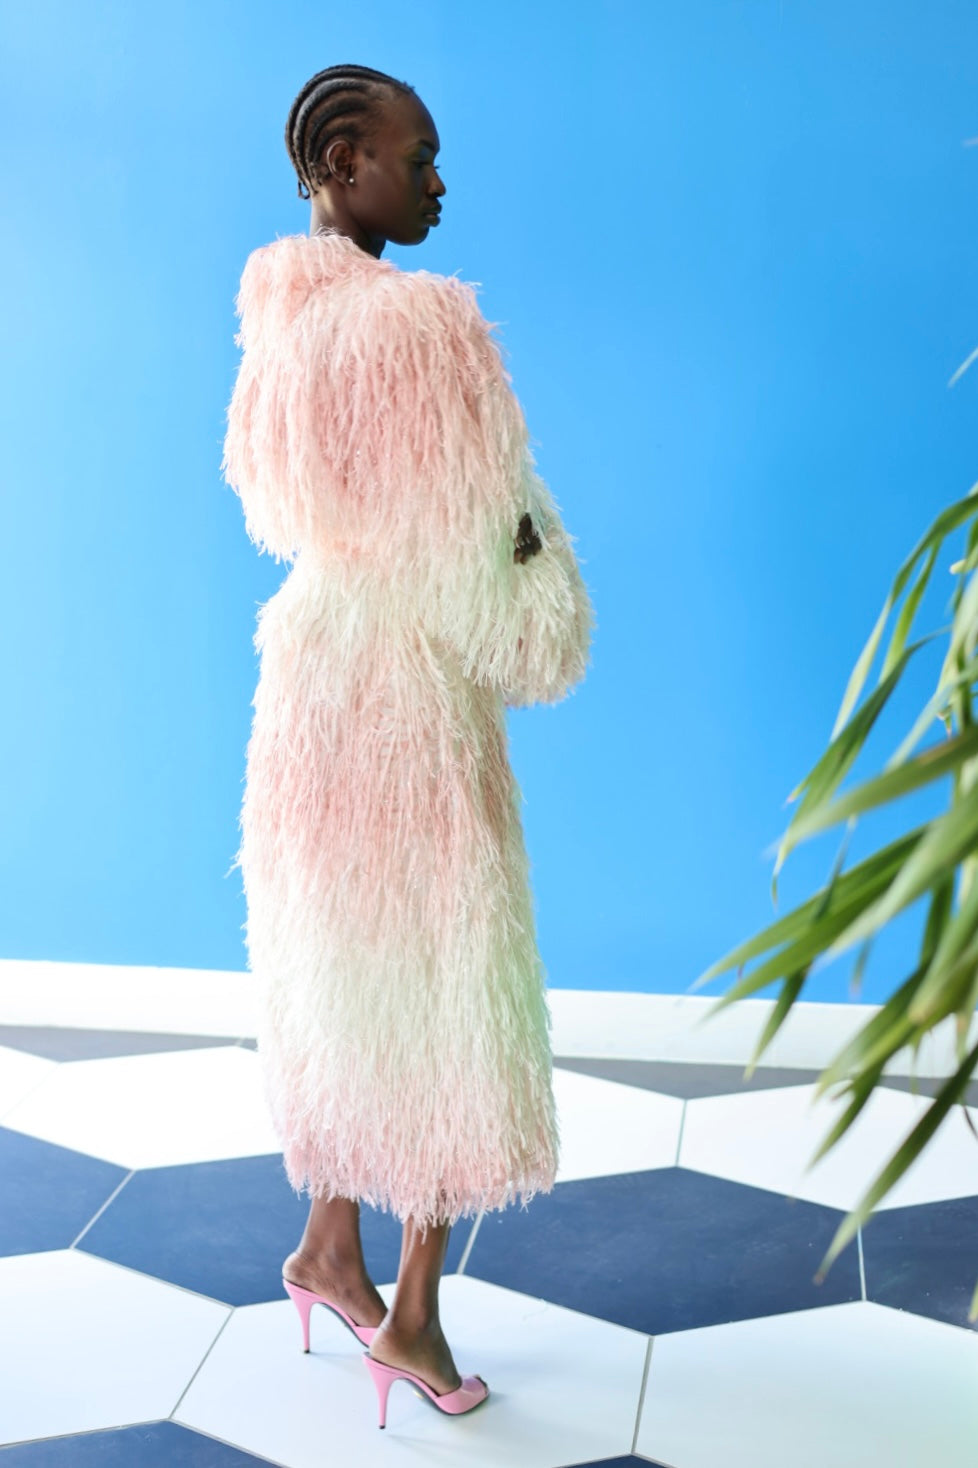 The Shaggy Brigitte Coat has an ombre effect from light pink to creamy white. Make a stunning silhouette.